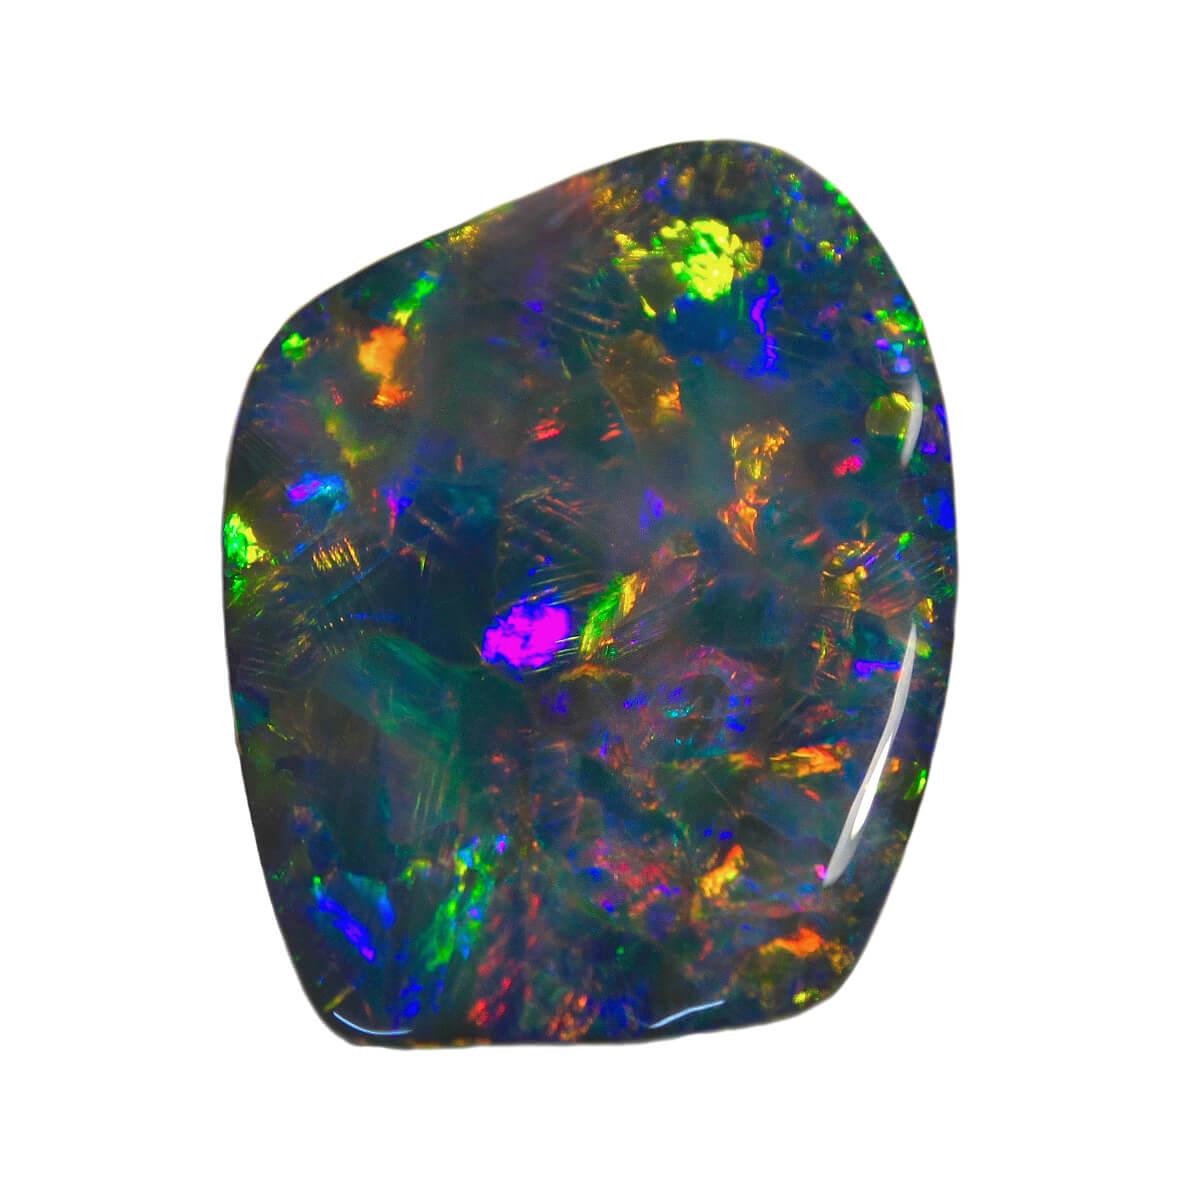 'Black Galaxy' 99.60ct Natural Solid Untreated Australian Black Opal For Sale